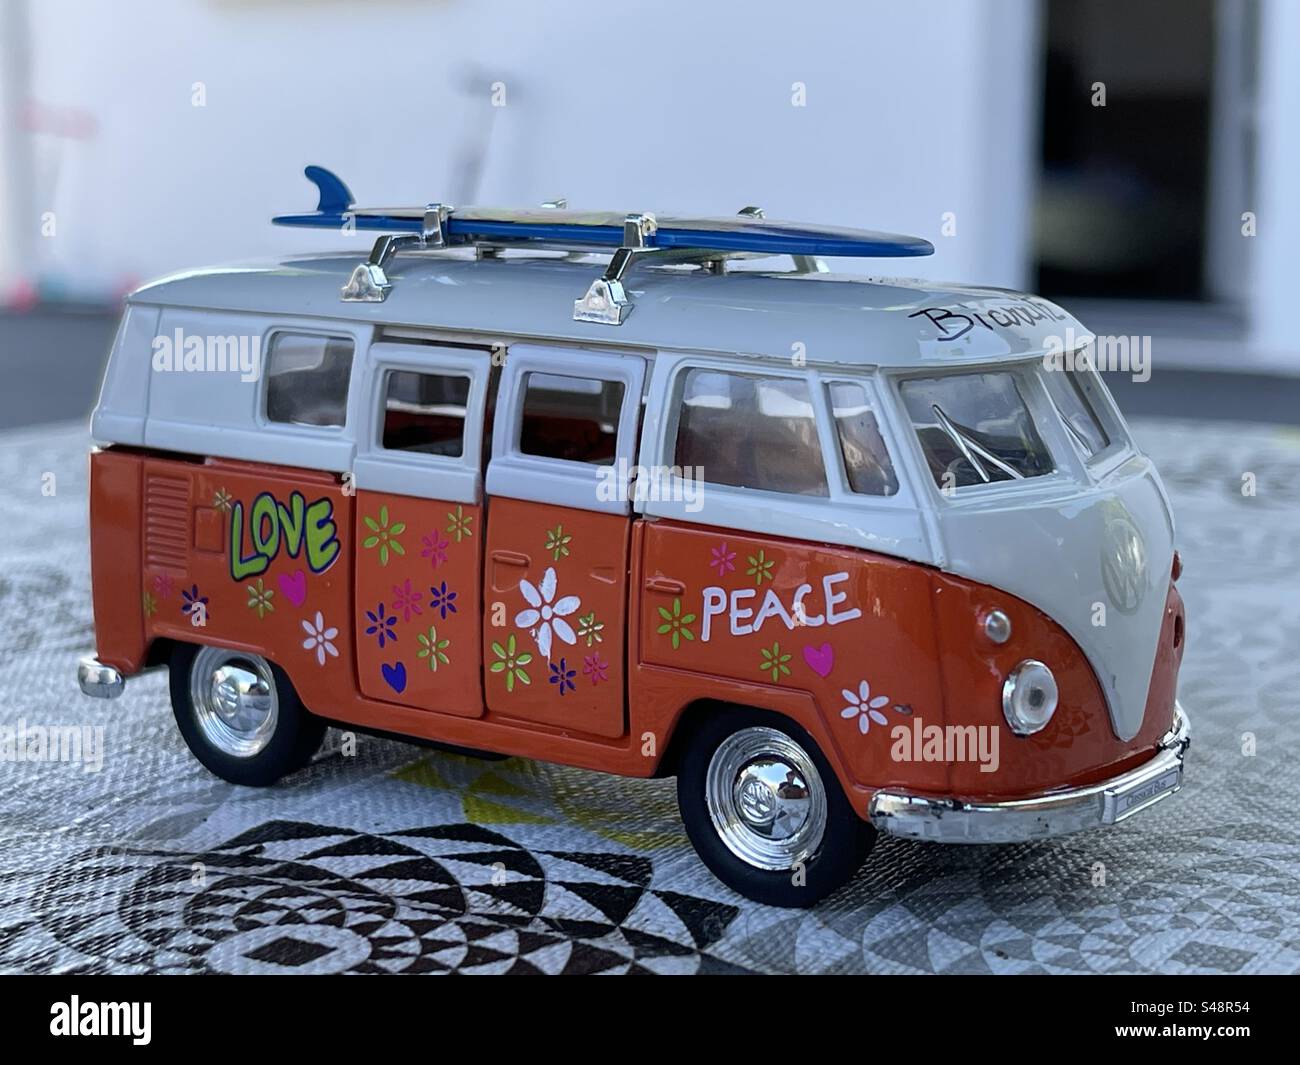 Close-up shot of a Volkswagen mini-bus model car with a surf board on its roof, peace and love and flowers on its side Stock Photo